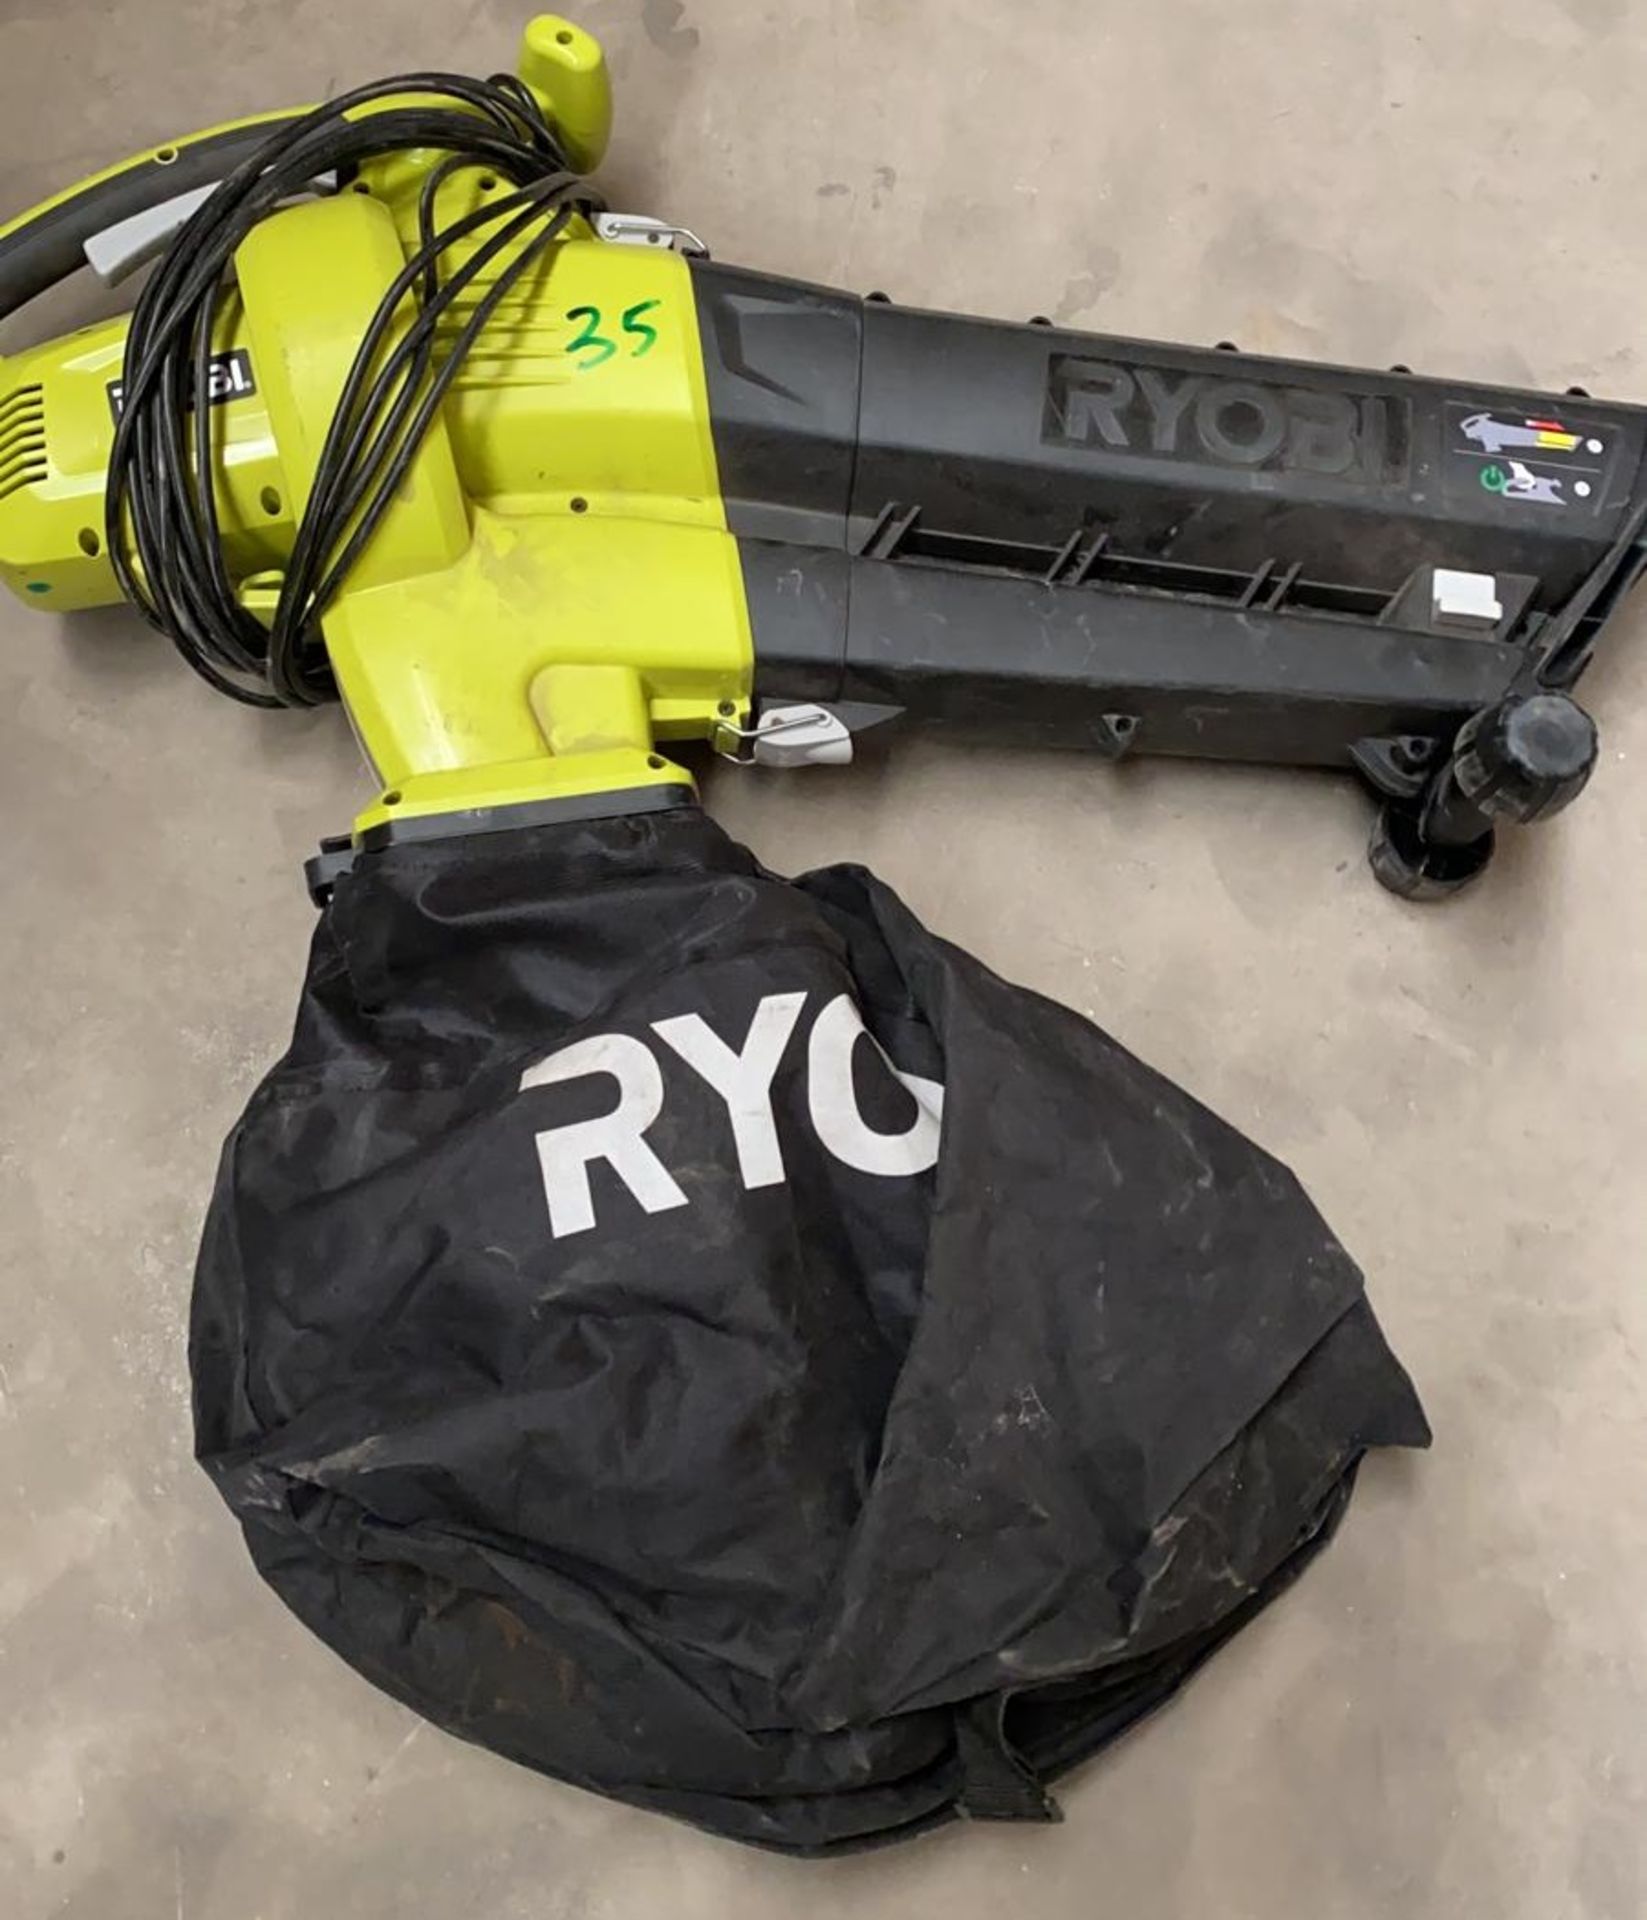 1 x Ryobi Electric Blower - Used, Recently Removed From A Working Site - CL505 - Ref: TL035 -